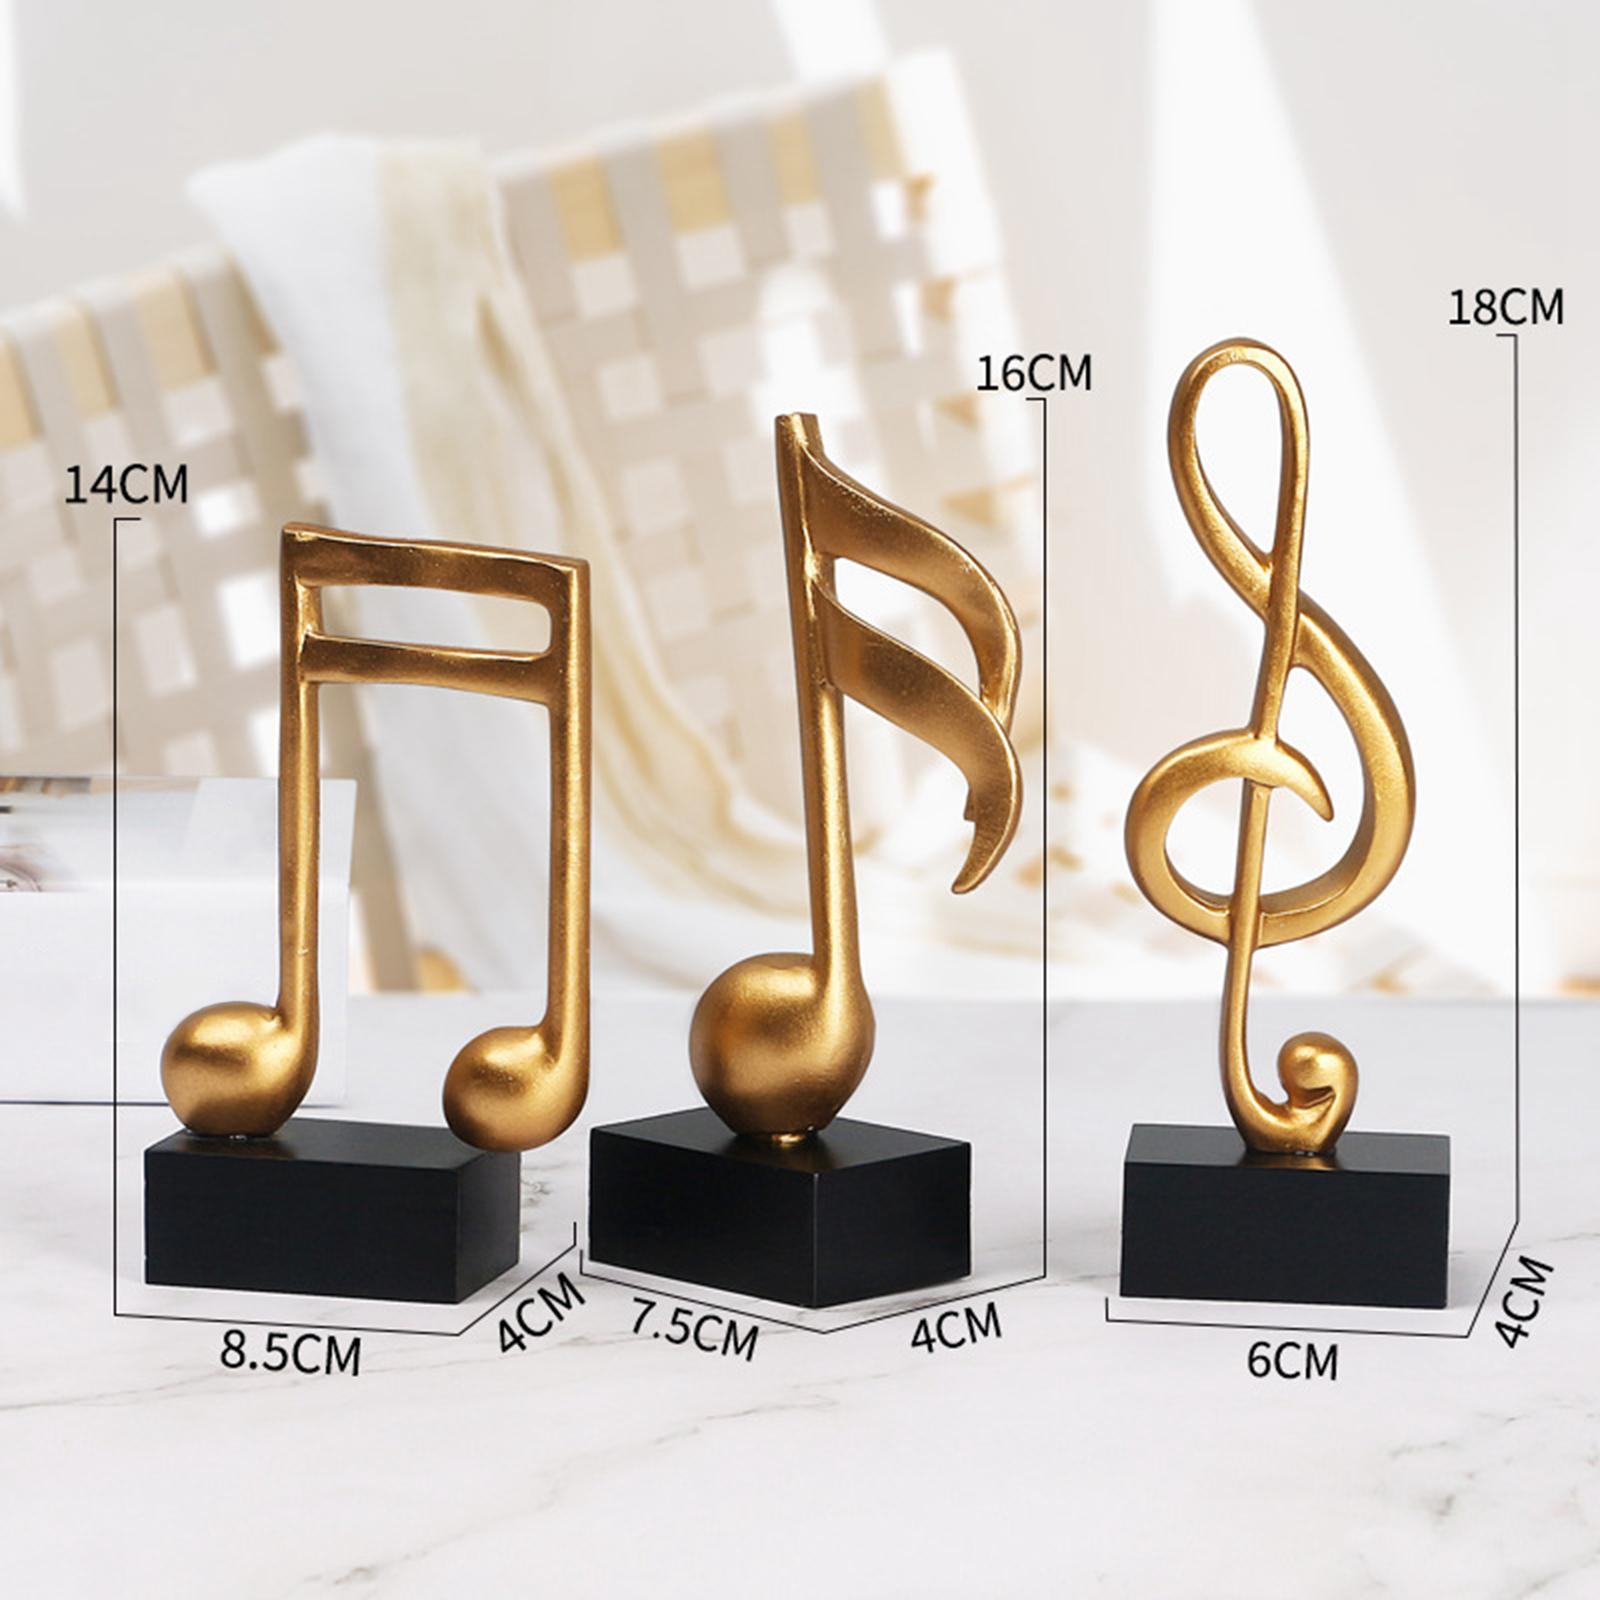 3Pcs Music Note Musical Sculpture Figurine Ornaments for Office Table Decor